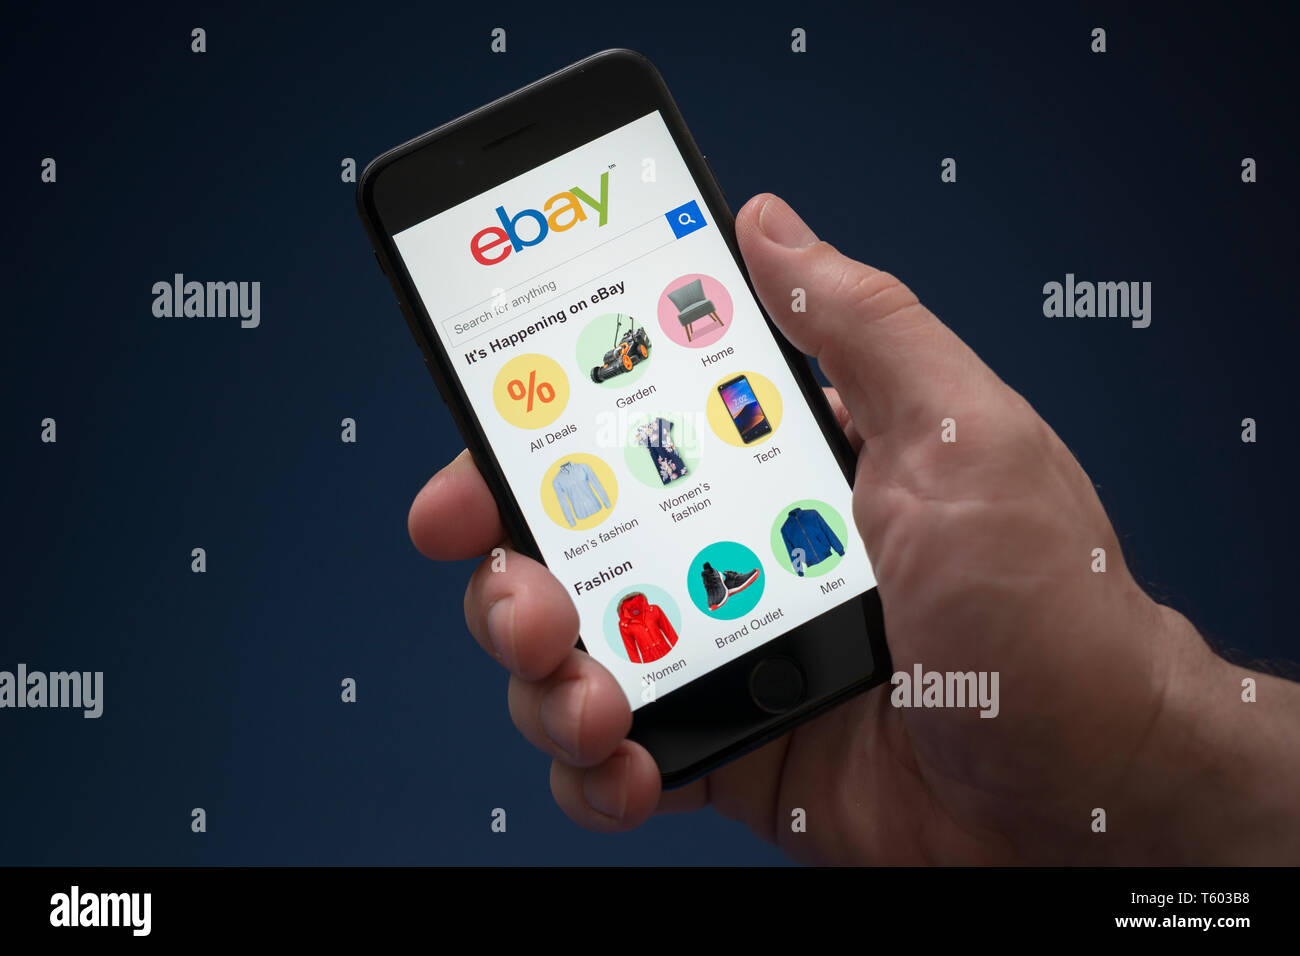 A man looks at his iPhone which displays the ebay logo (Editorial use only). Stock Photo